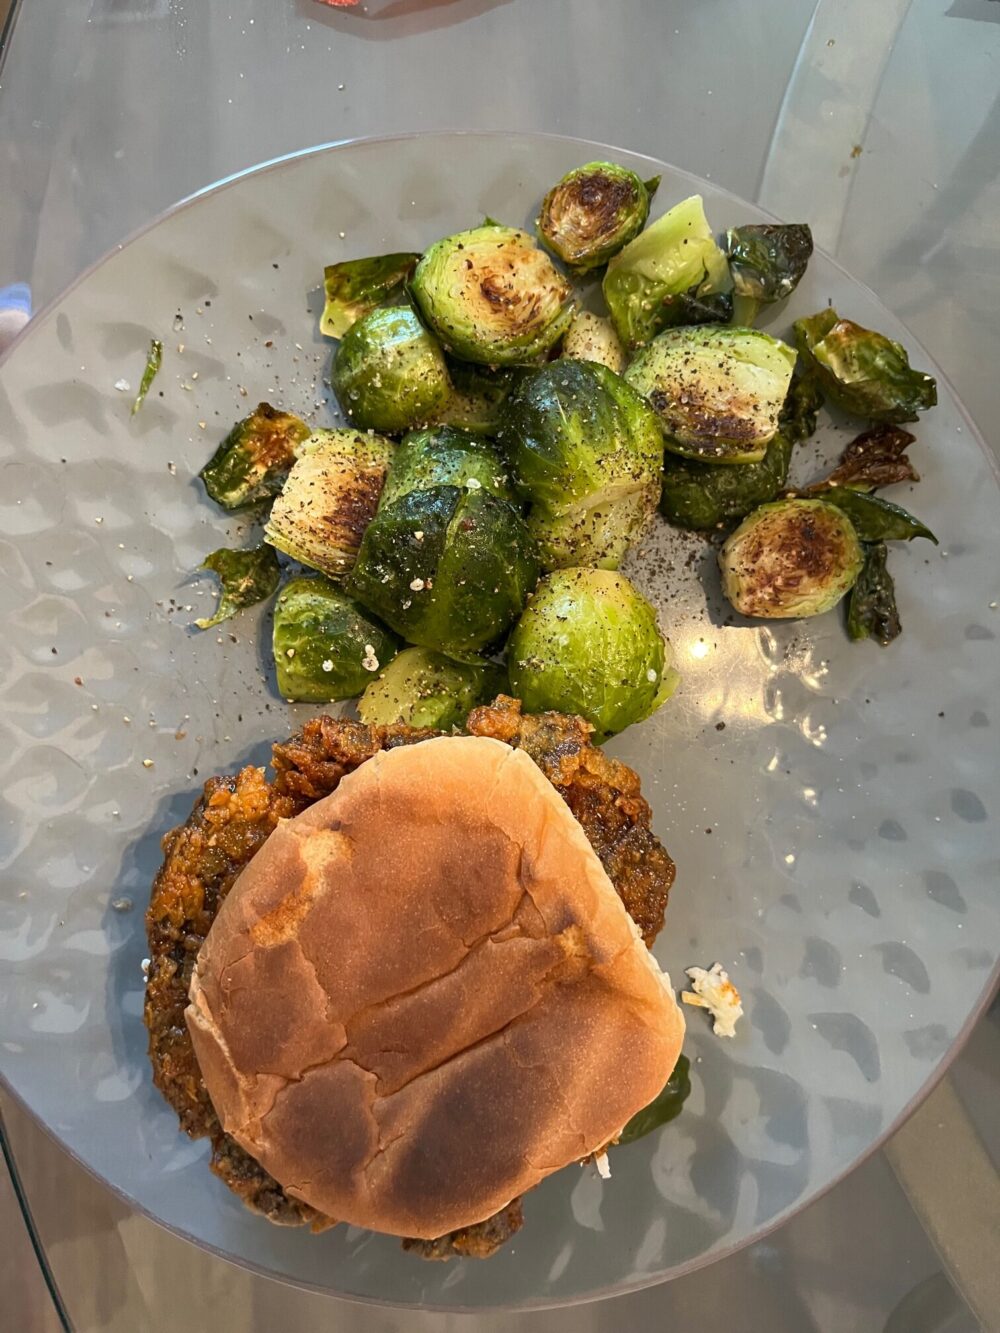 fried portobello sandwich with bun and roasted brussels sprouts on a gray plate